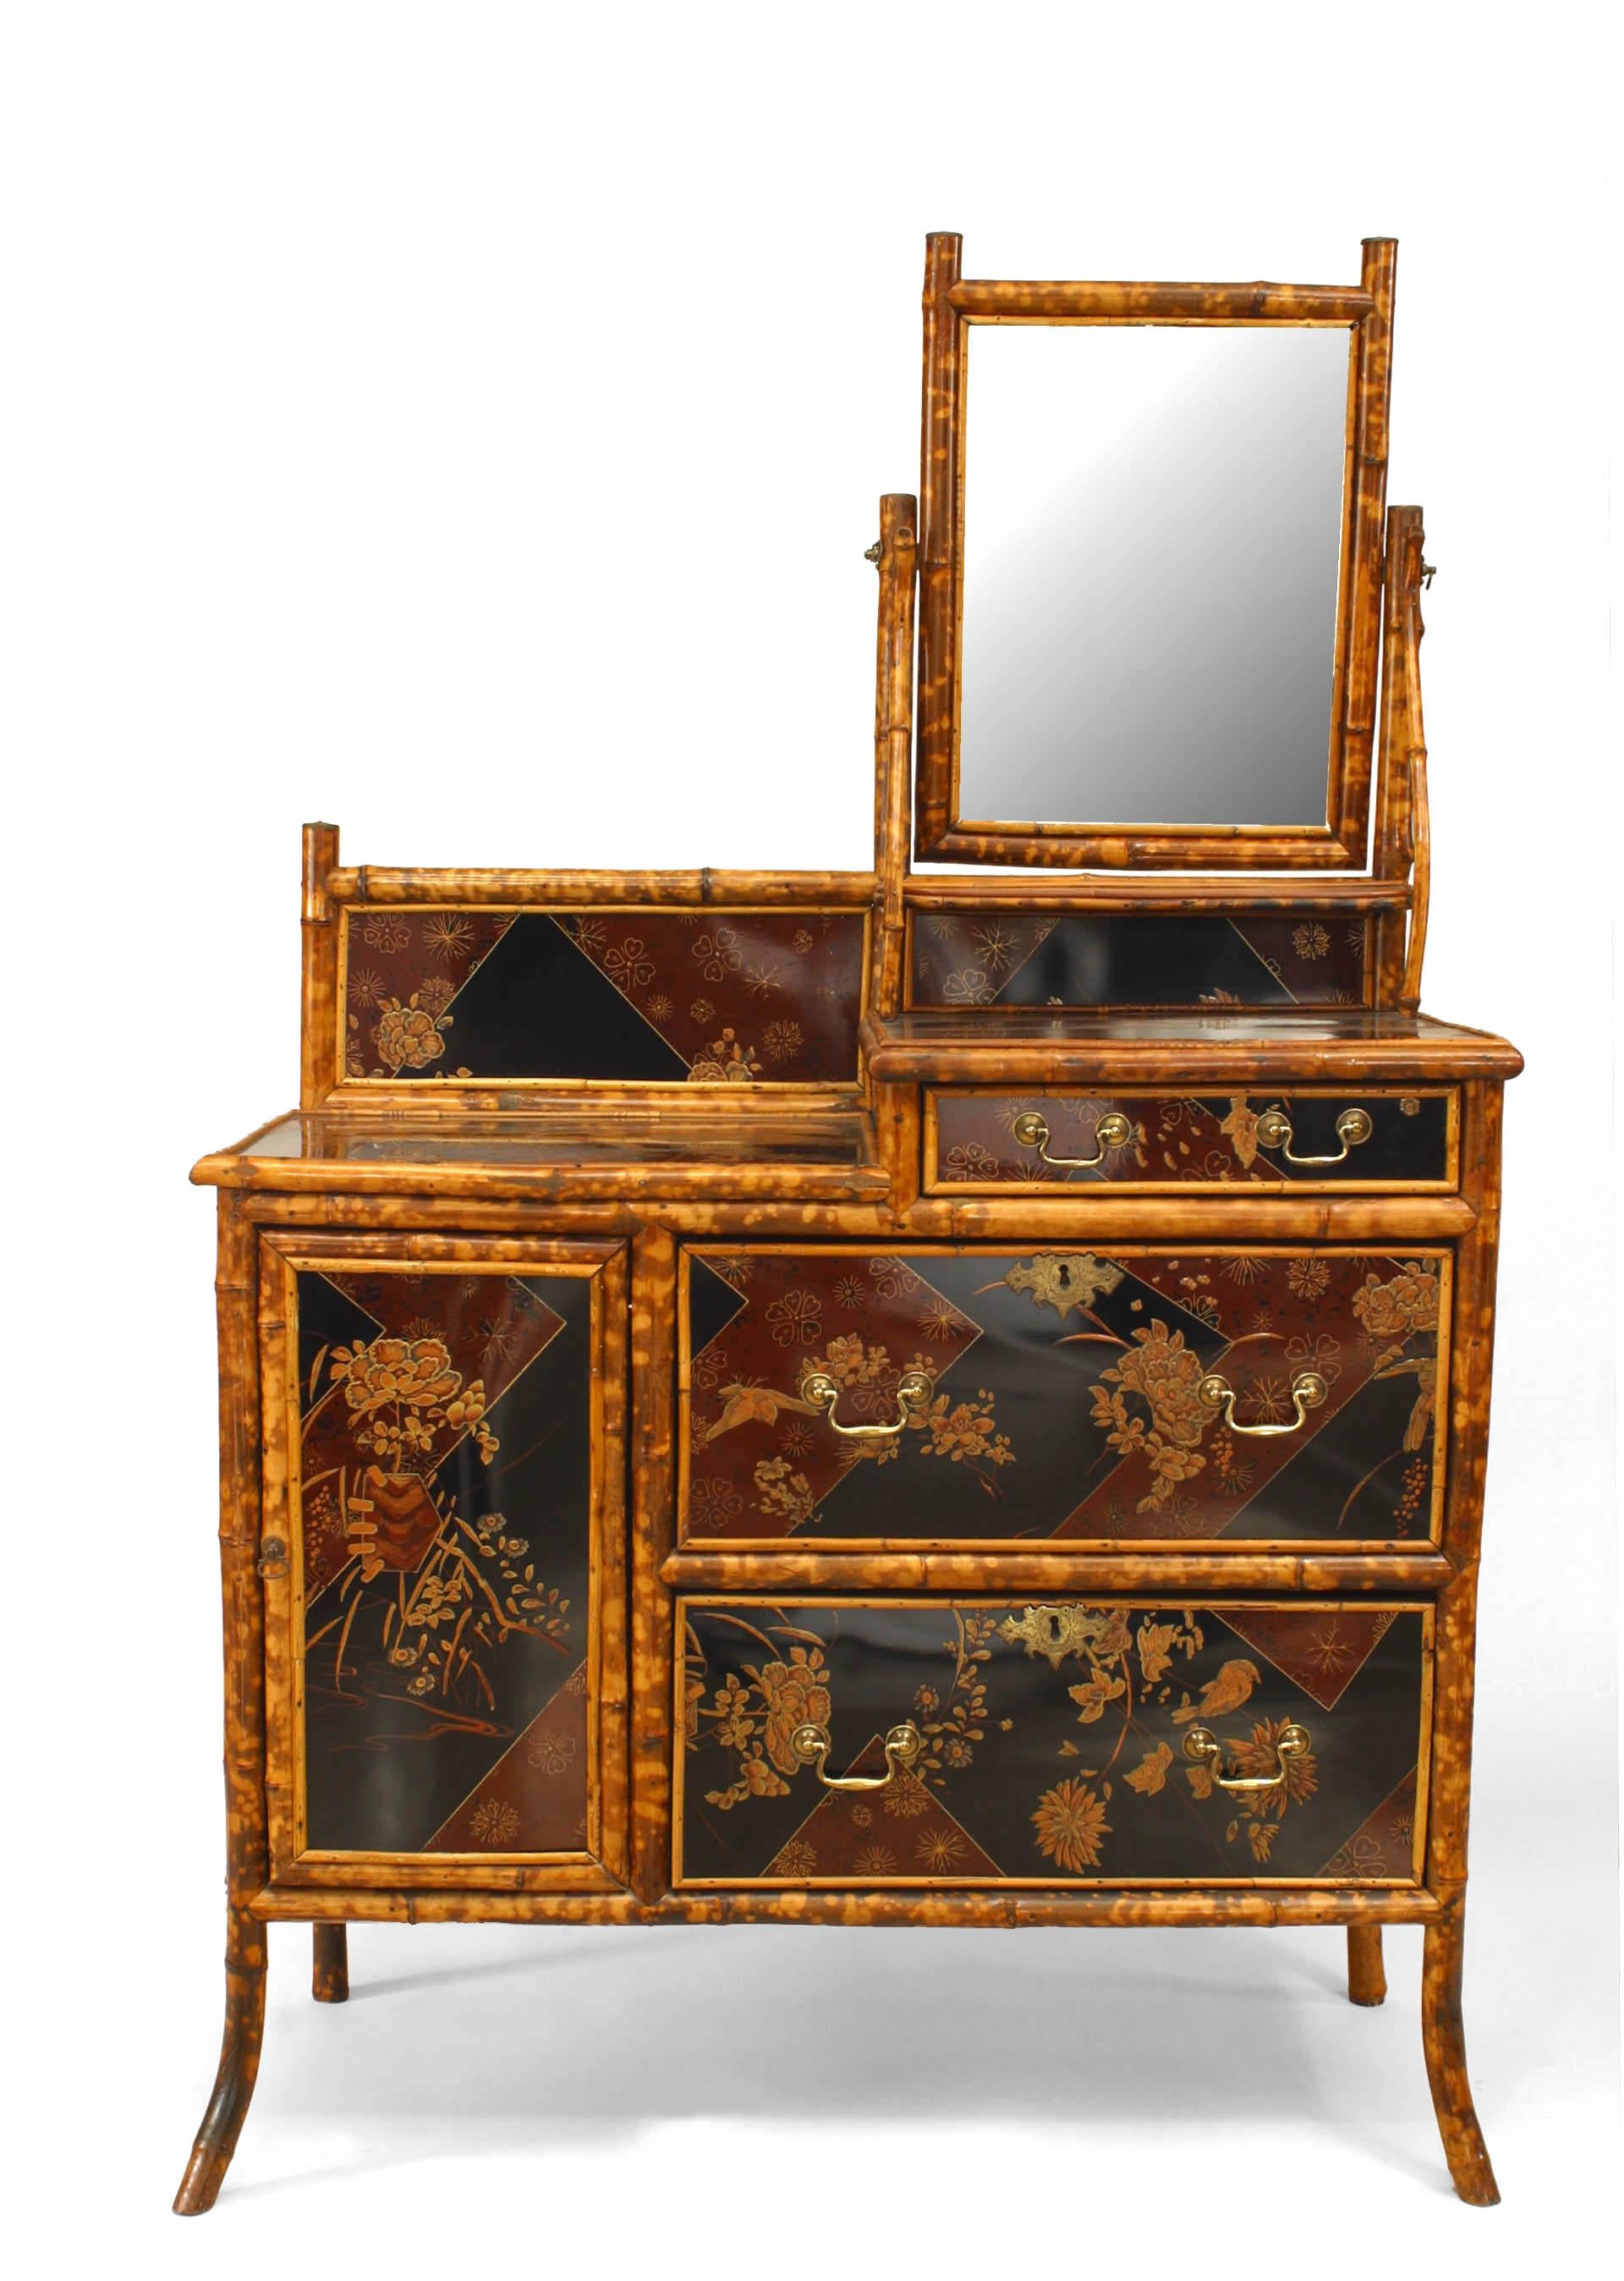 English Victorian-style (20th Century) bamboo and chinoiserie decorated lacquered paneled dresser with backrail and swivel mirror.
